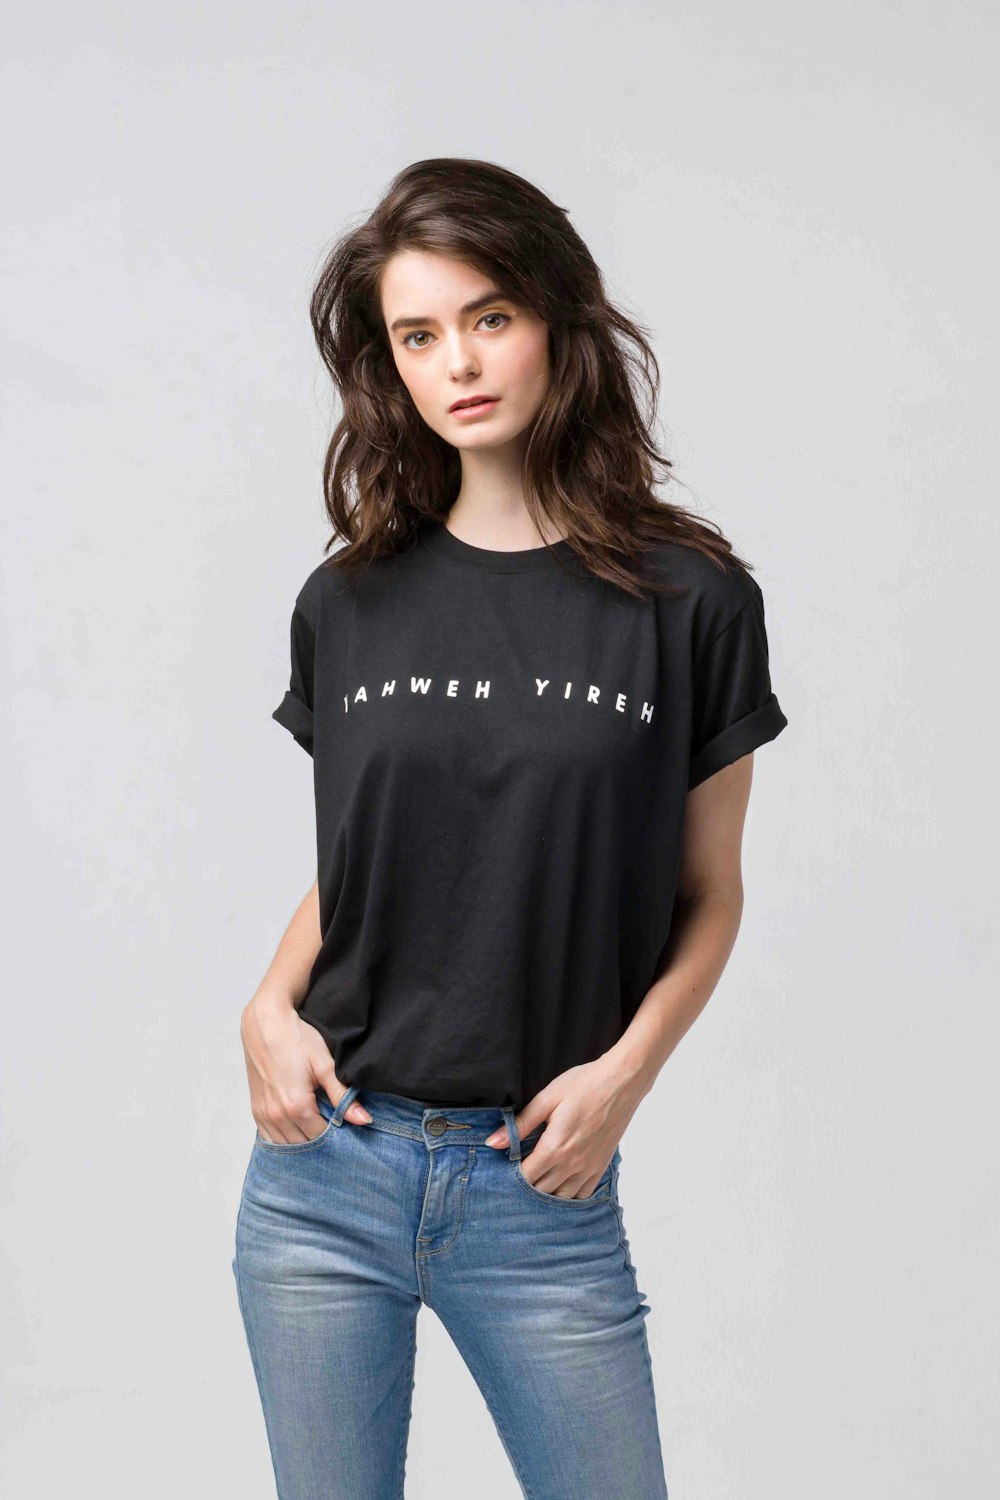 Woman in black crew neck t-shirt and blue denim jeans photo – Free Grey  Image on Unsplash